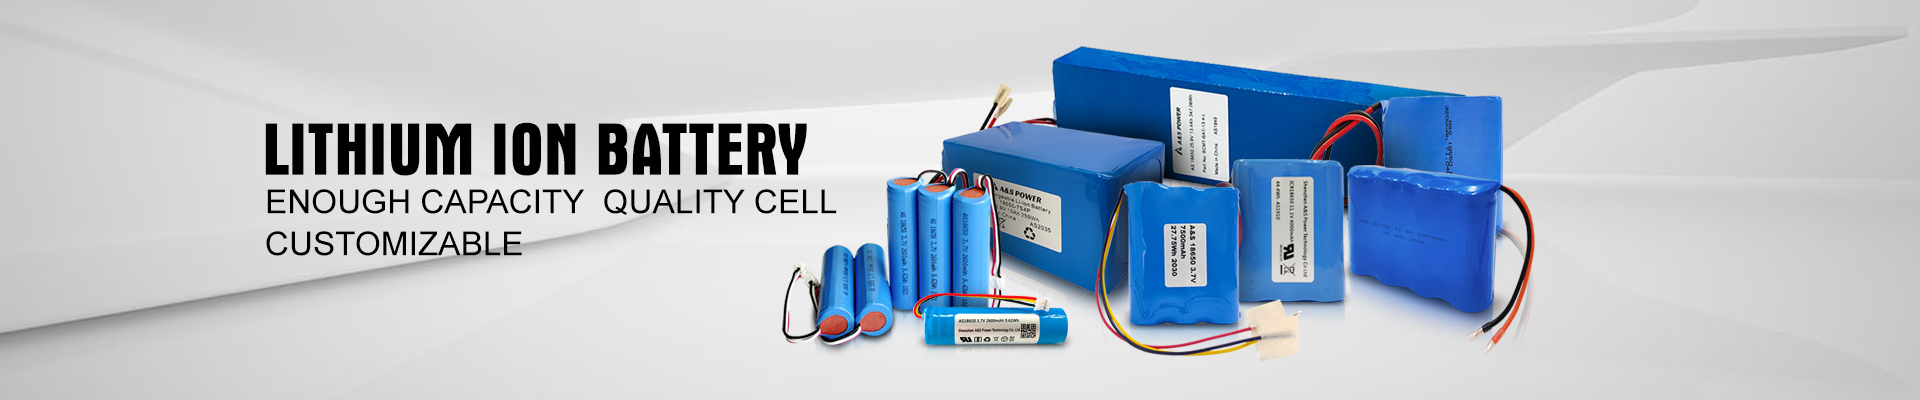 A&S Power 18650 Lithium Ion Battery Manufacturer